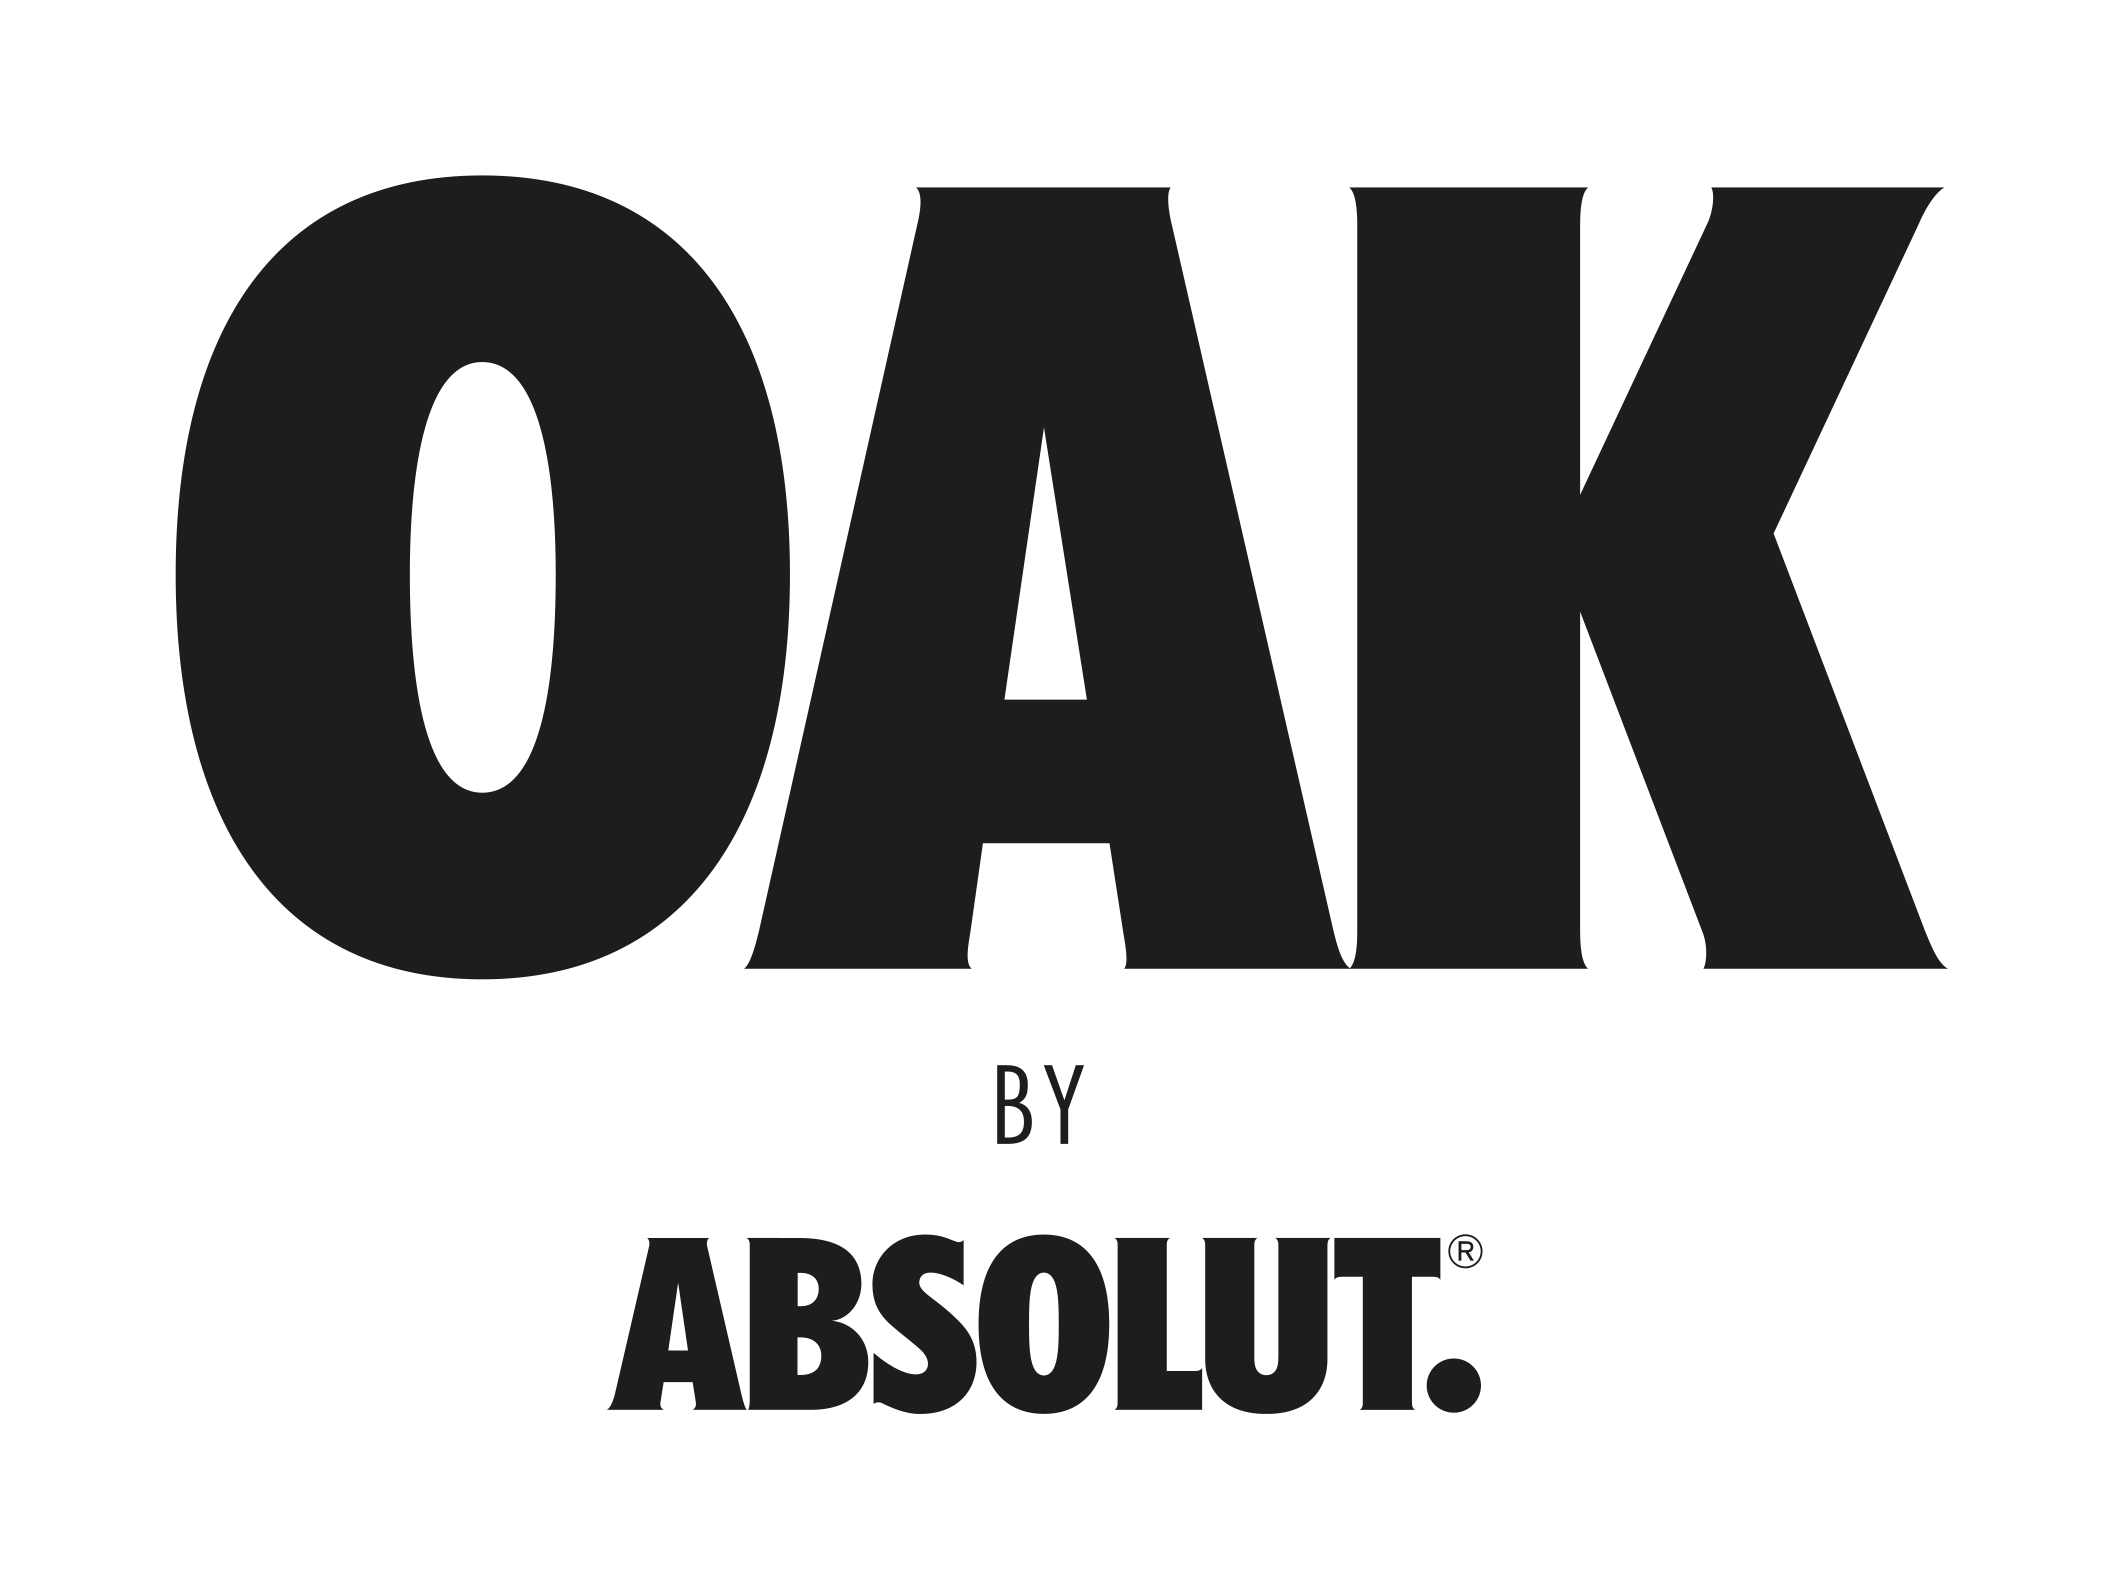 Absolut Logo - Oak by Absolut Logo Black.png ⋆ BYT // Brightest Young Things